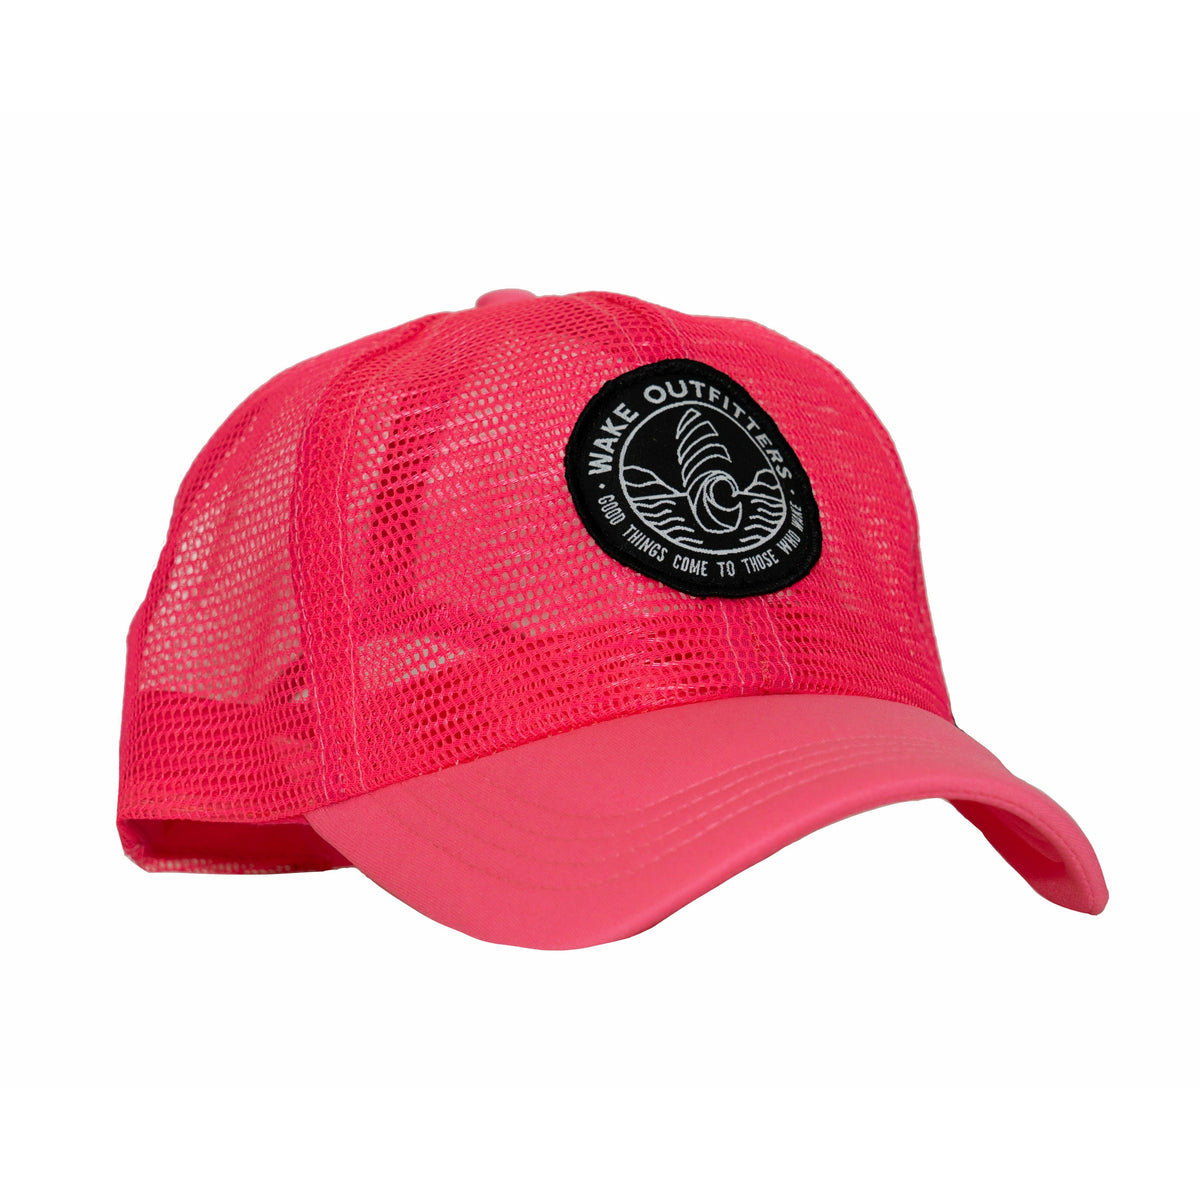 Wake Outfitters Full Mesh Trucker Hat - Pink